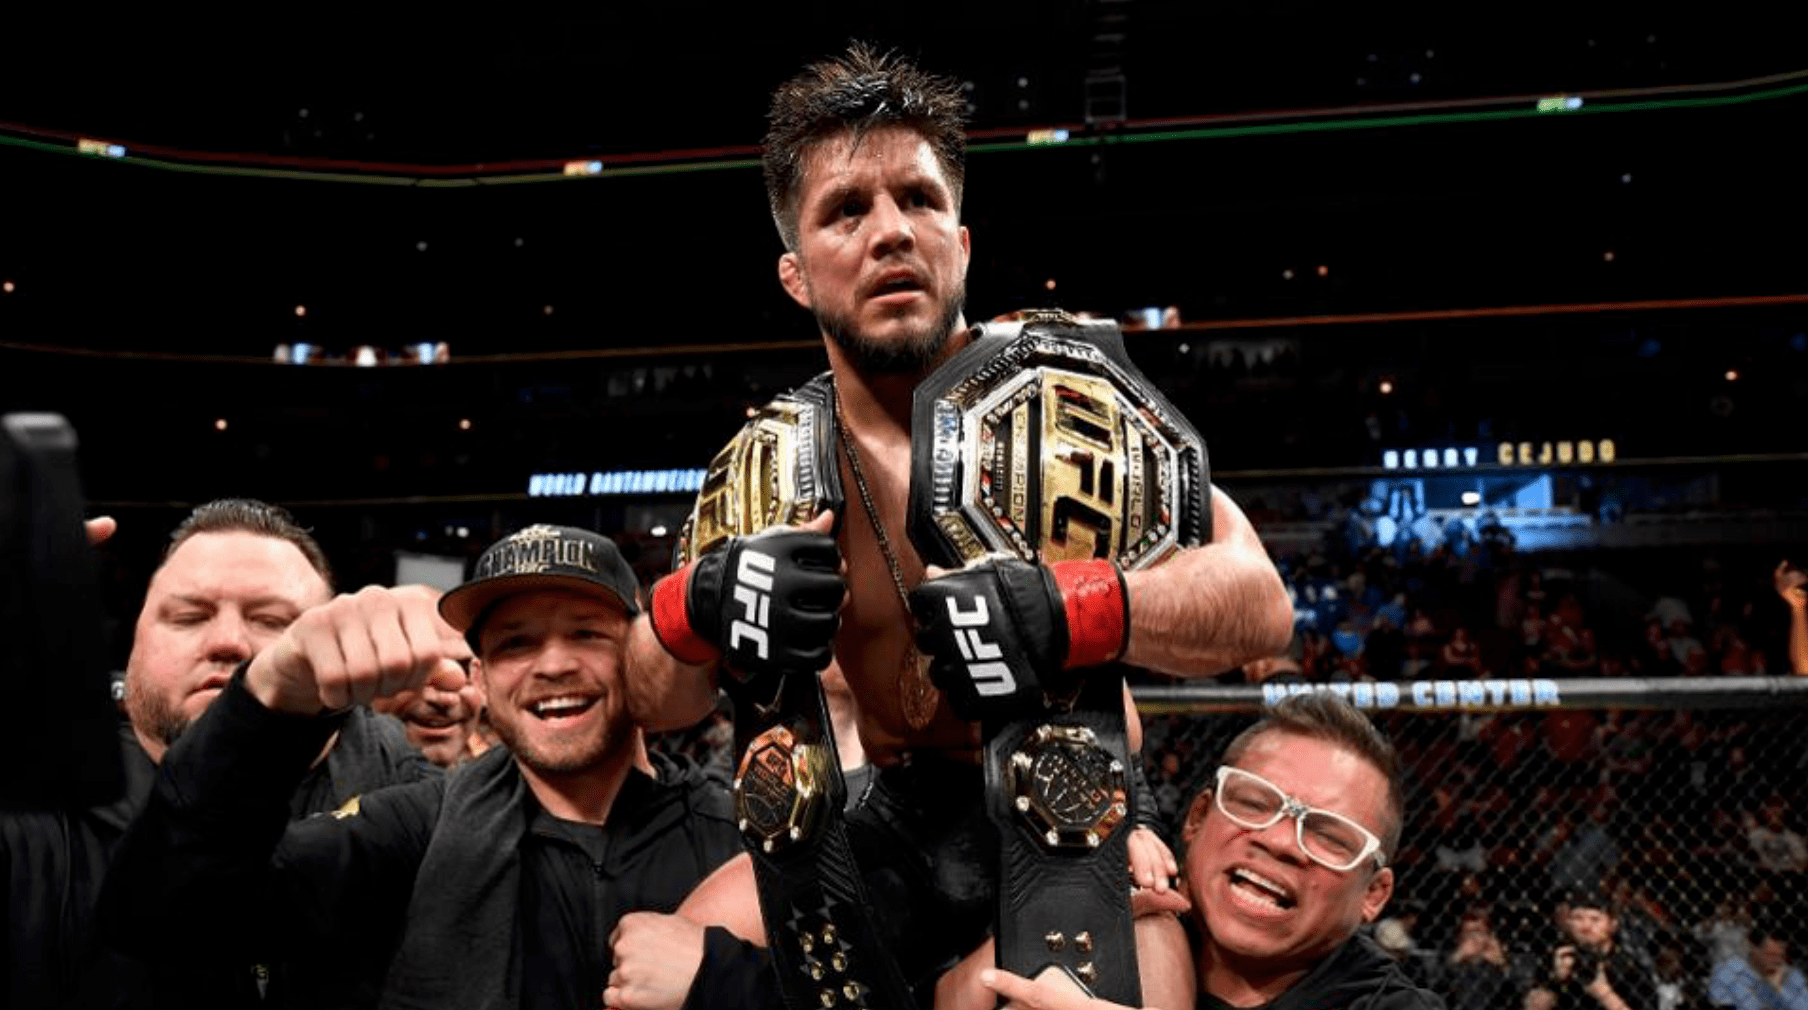 Cejudo, Moraes, Eye, Cowboy & Others React To Their Fights At UFC 238